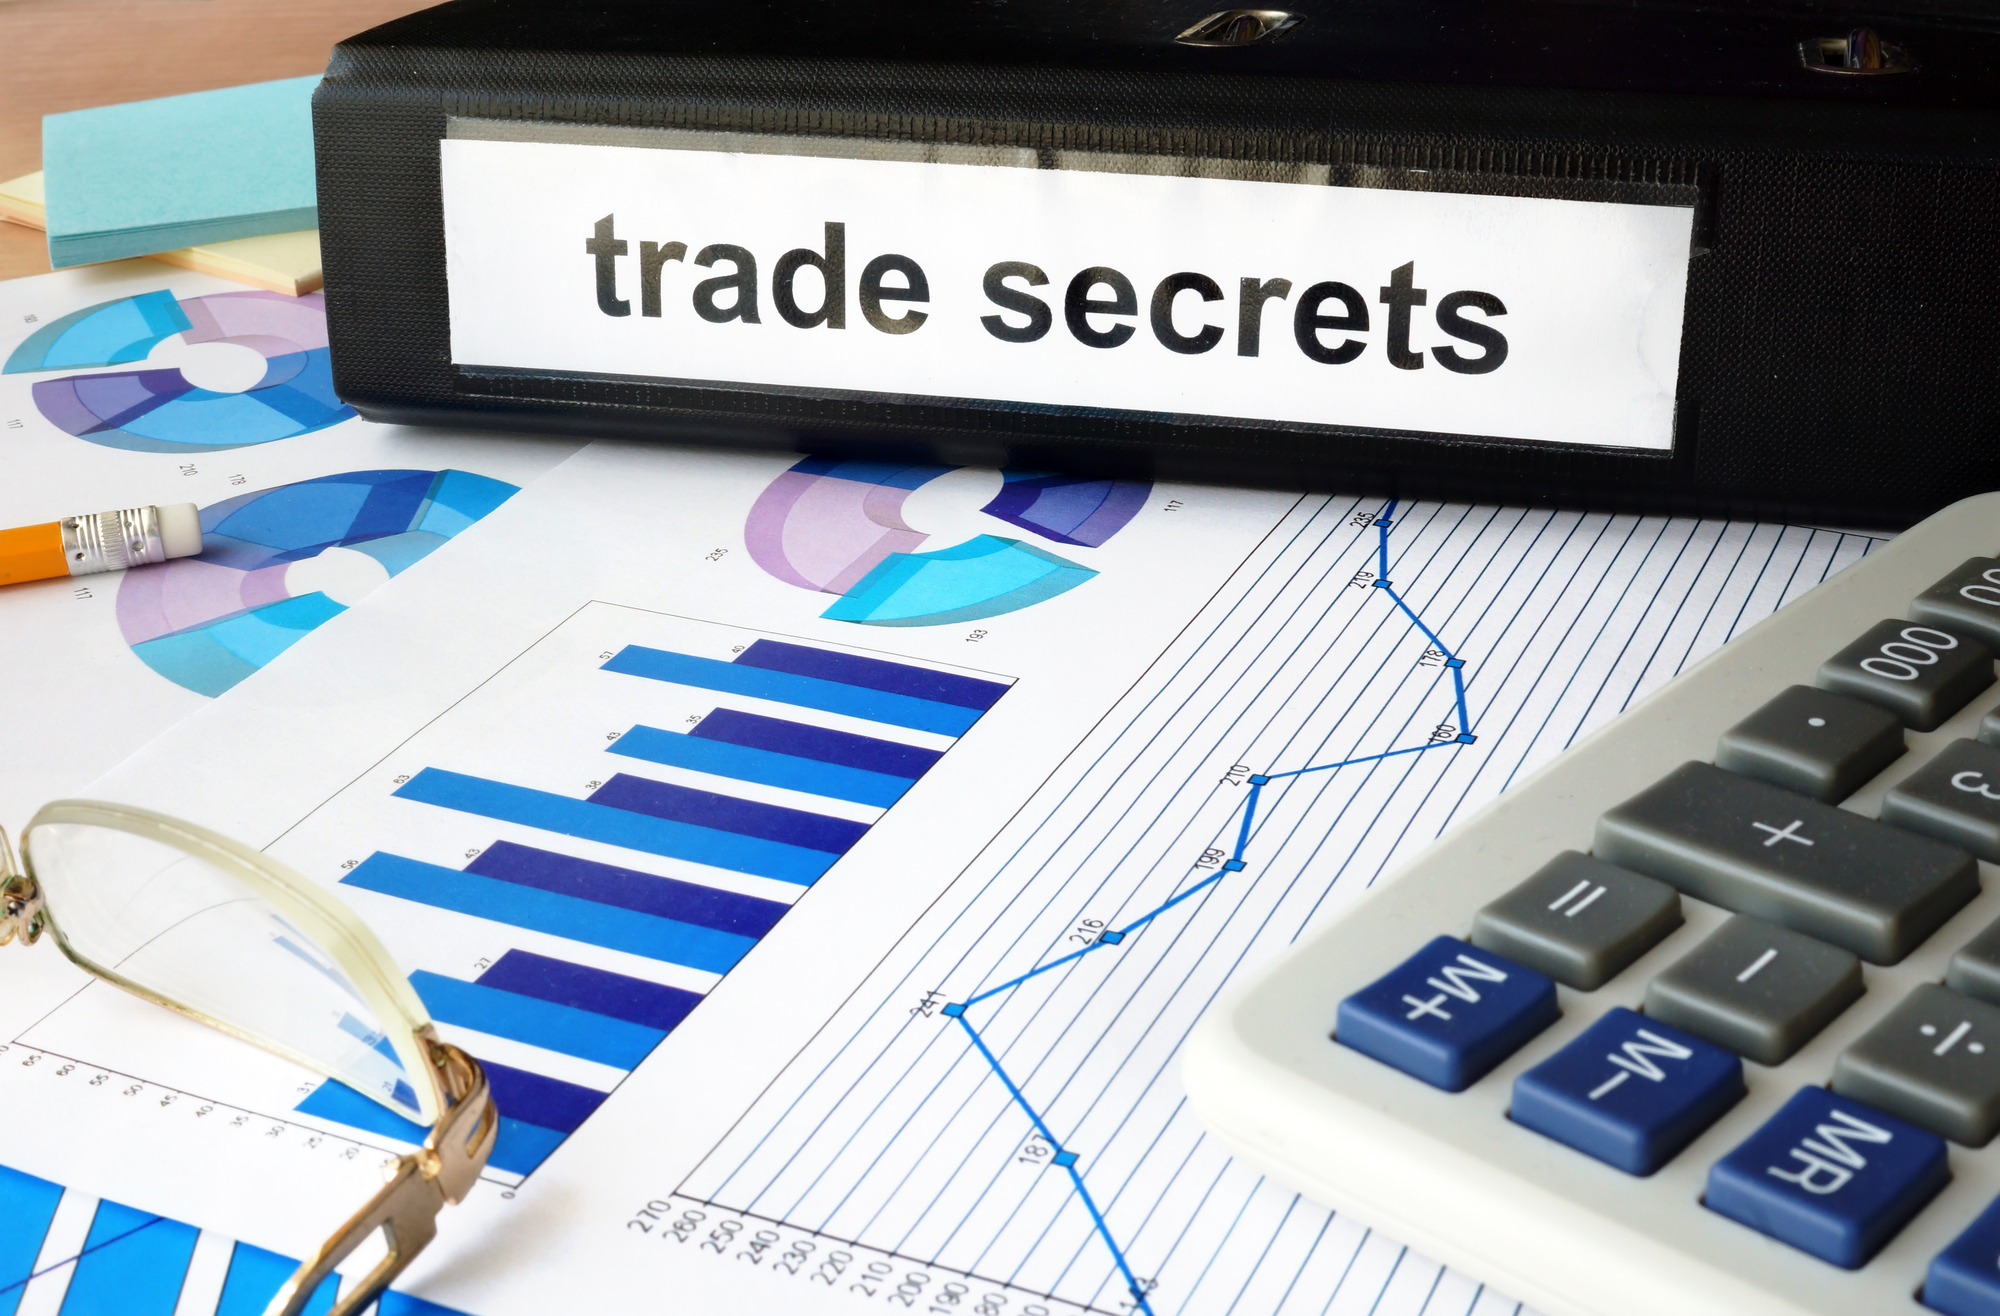 Still image: Binder labeled "trade secrets" resting on top of business papers and graphs.